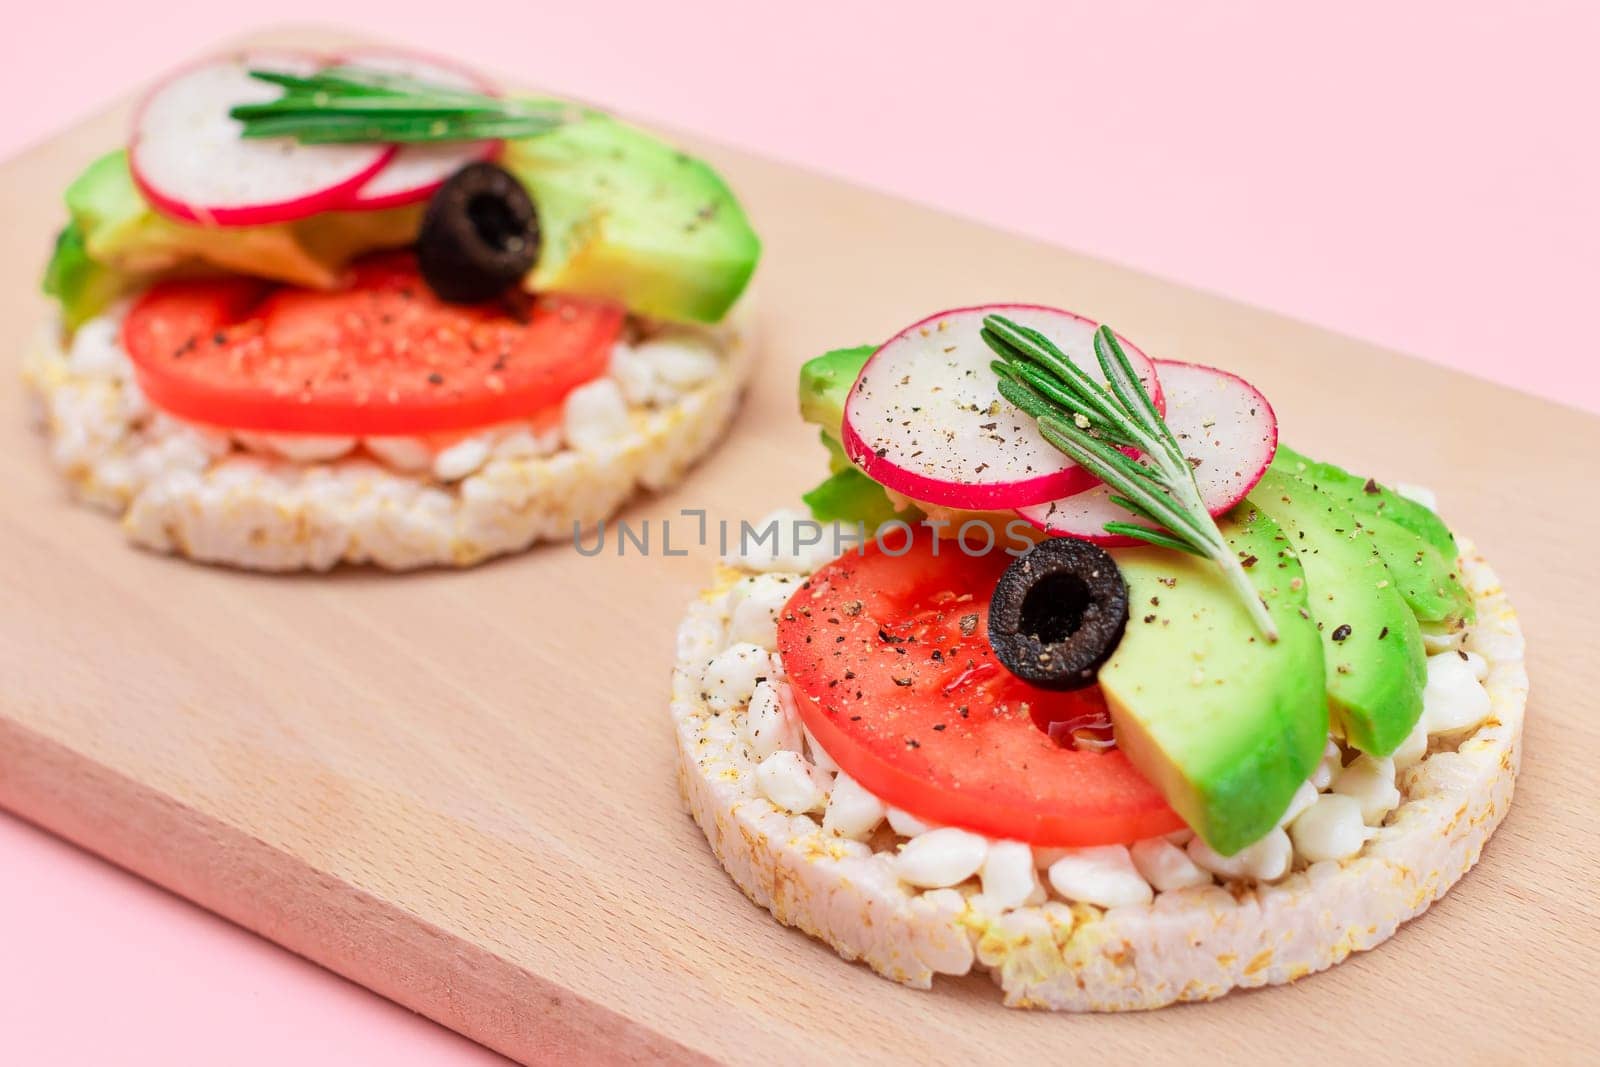 Rice Cake Sandwiches with Avocado, Tomato, Cottage Cheese, Olives and Radish by InfinitumProdux